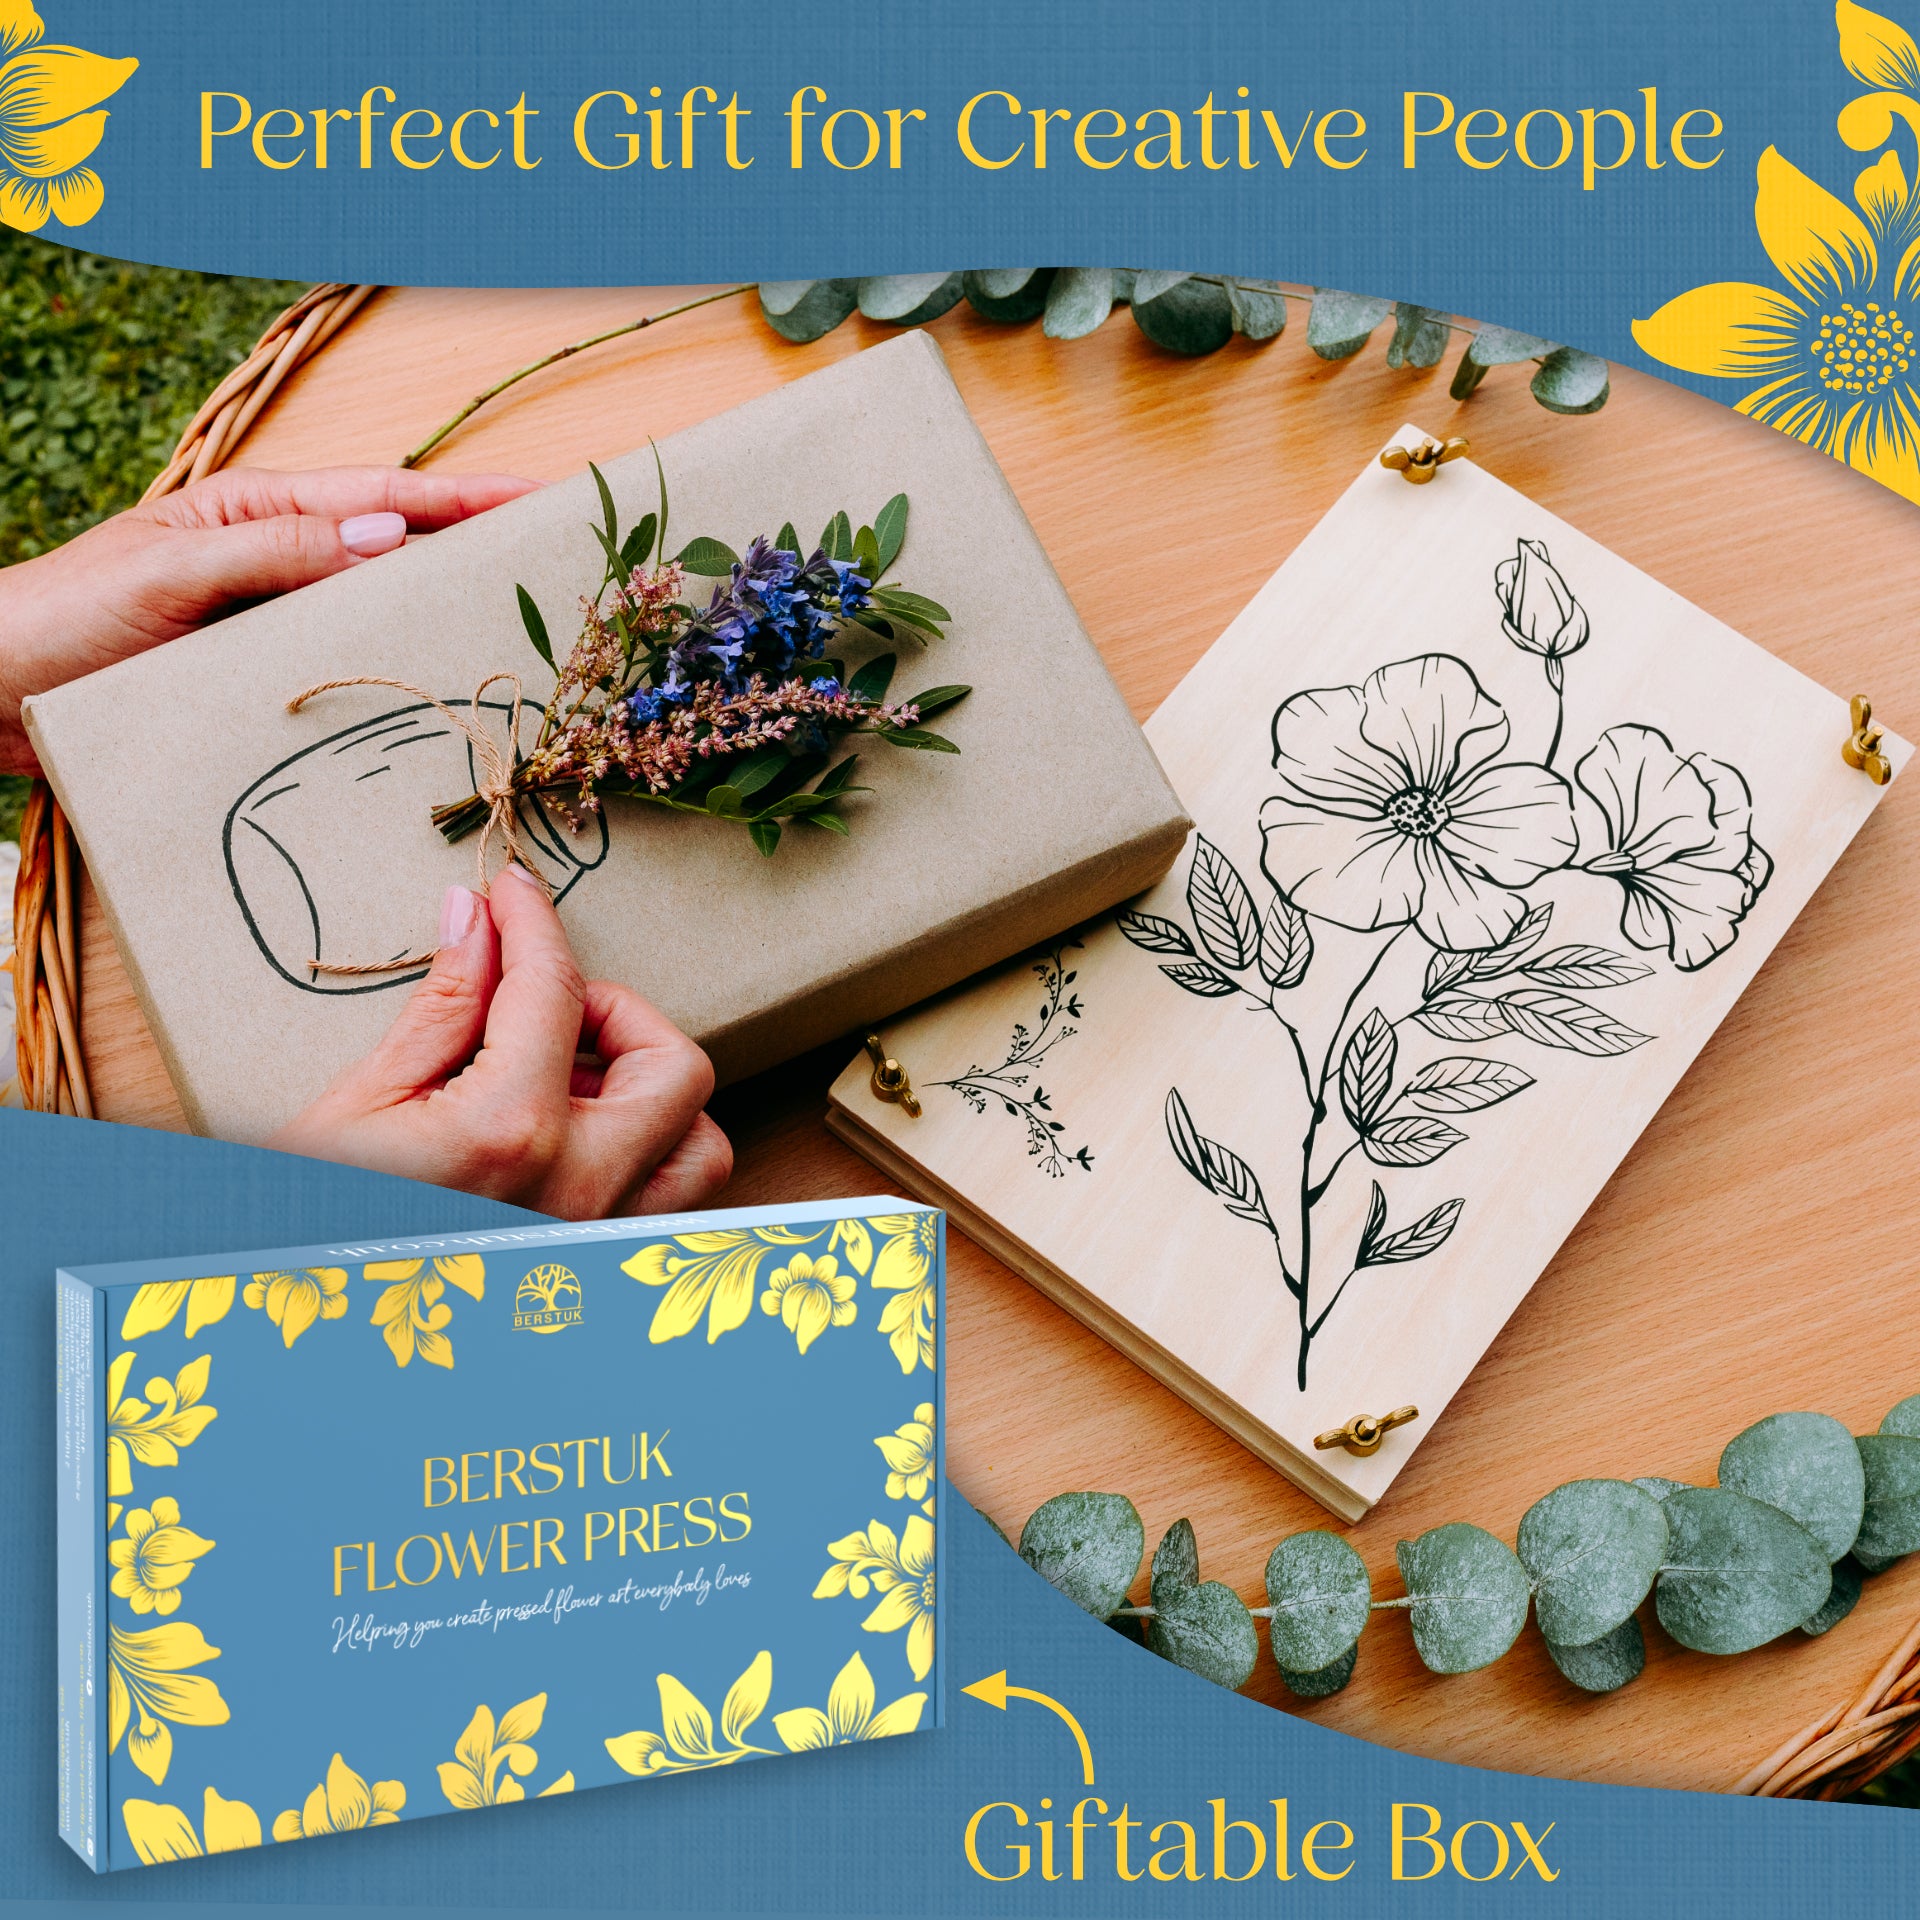 12 Best Flower Press Kits to Craft Homemade Decorations